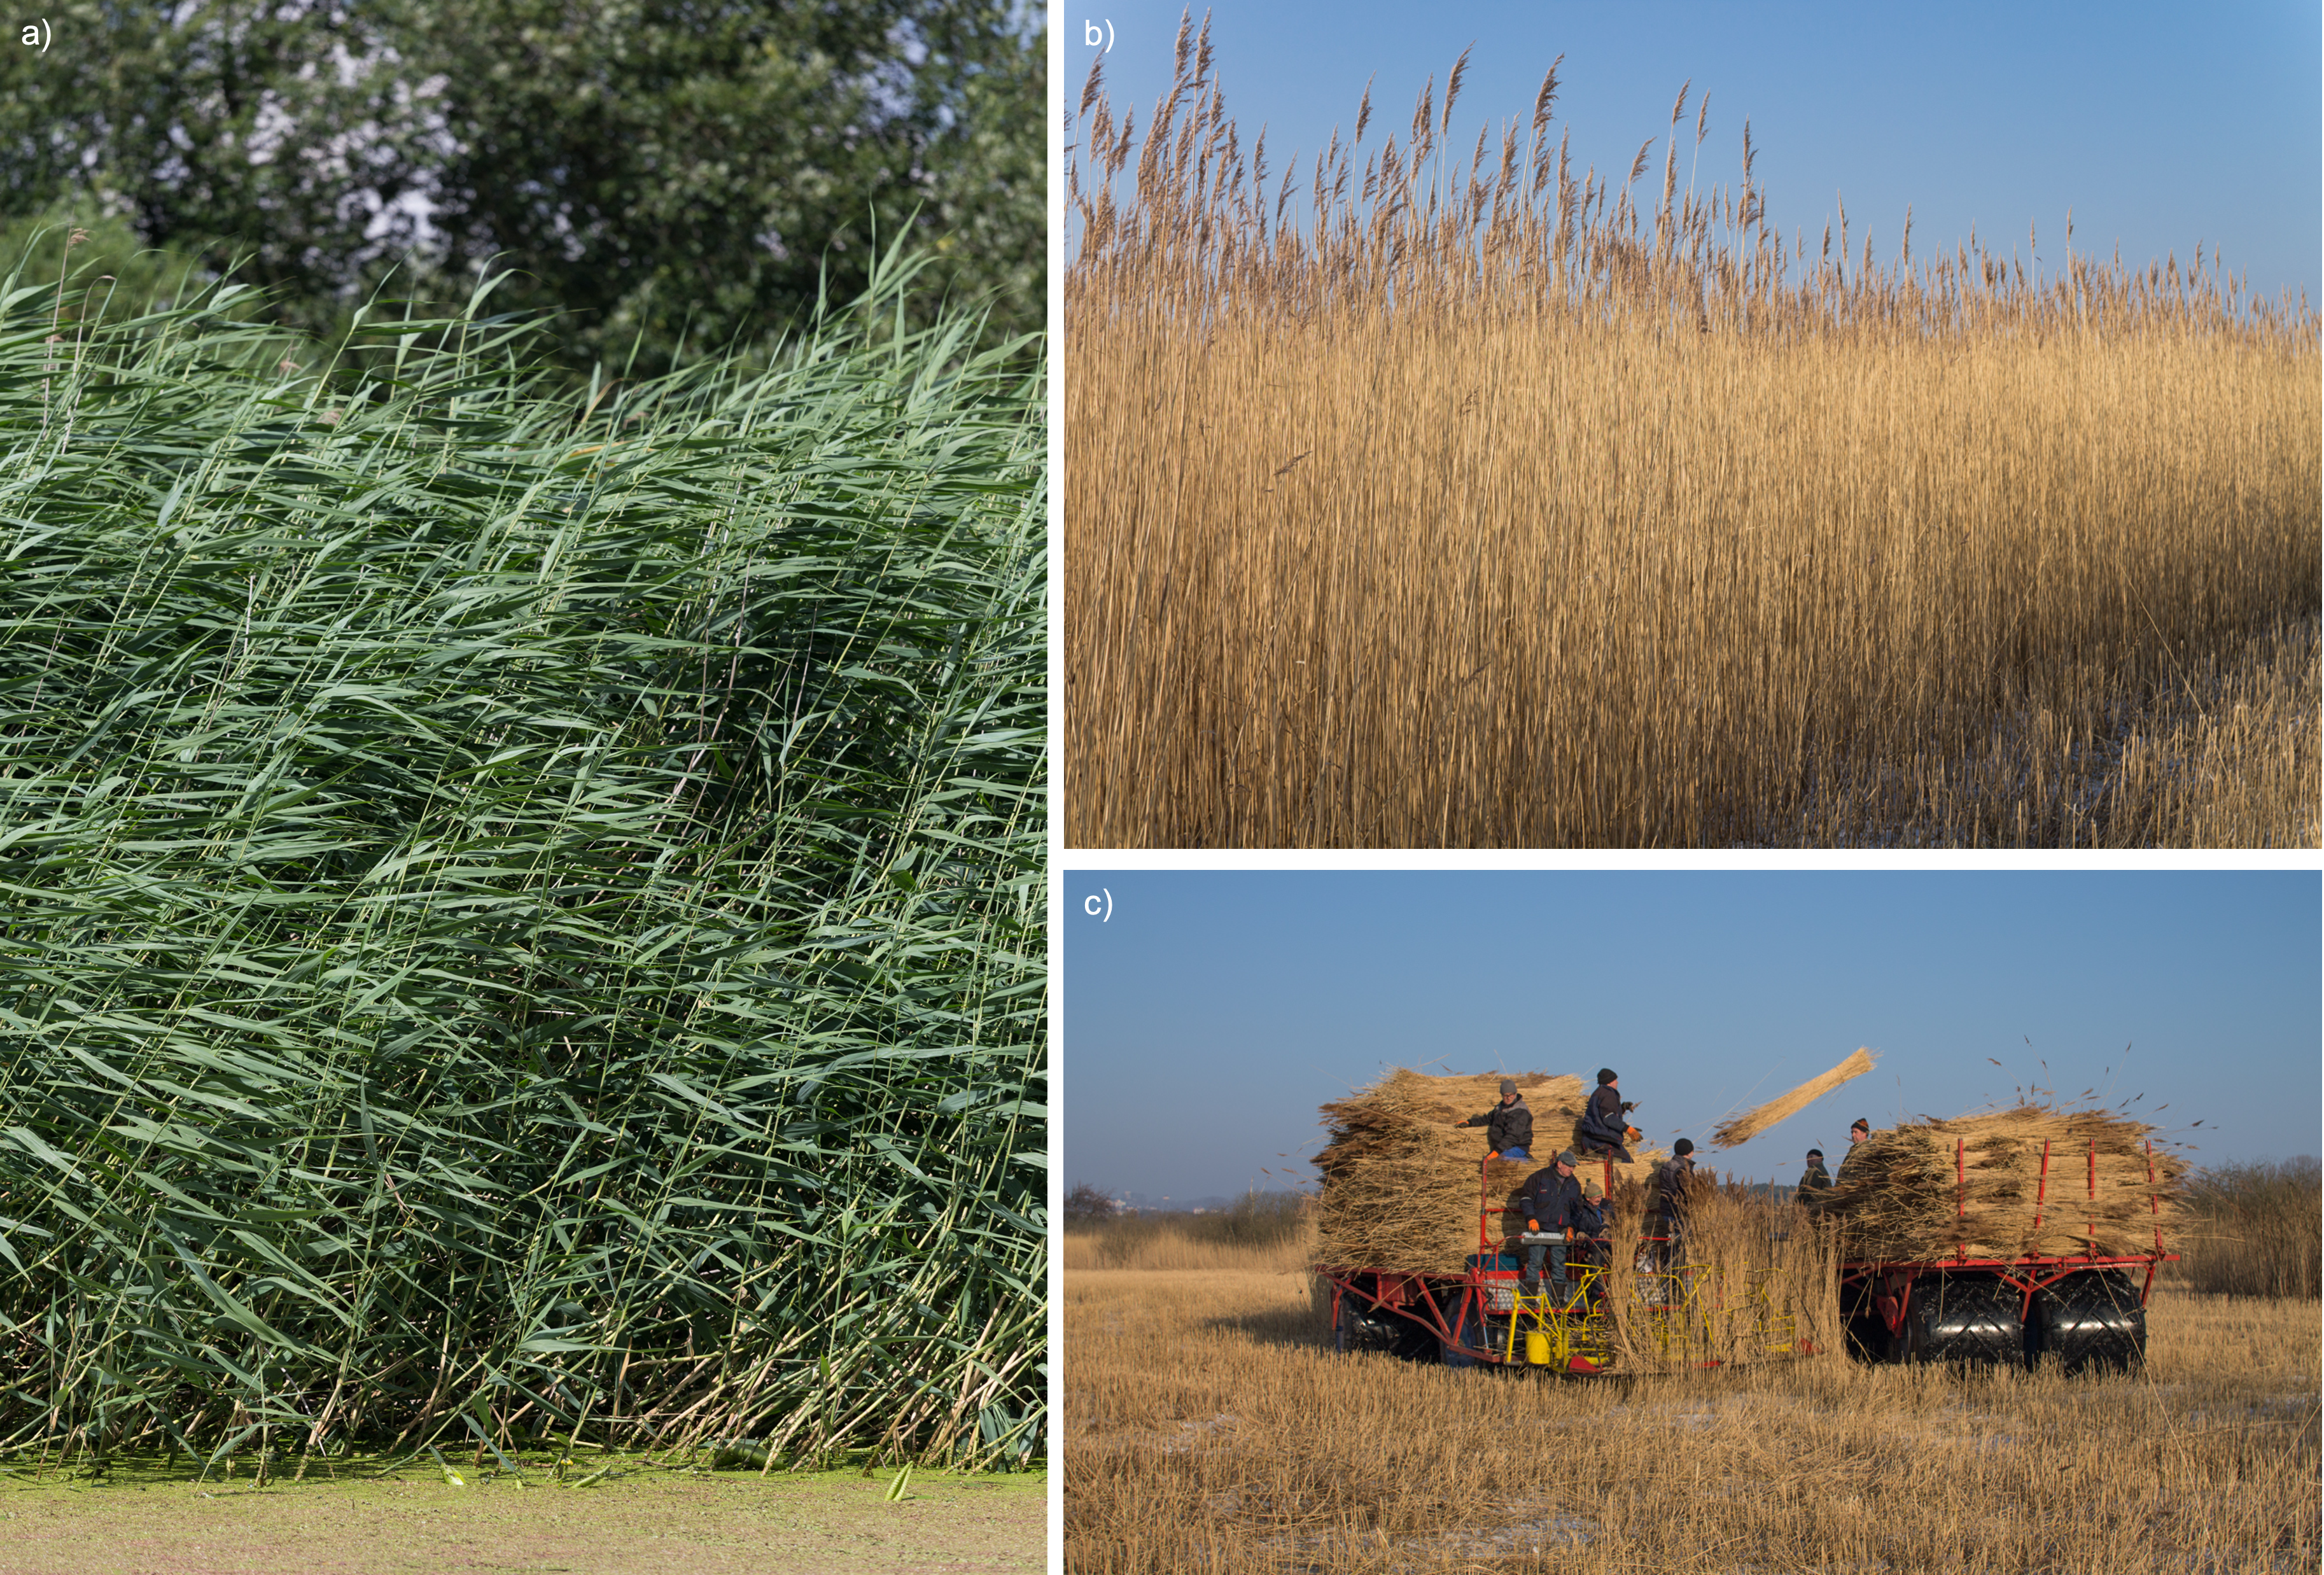 a) green reed, b) dry brown reed, c) harvester and workers throwing brown reed bundles onto a tractor.